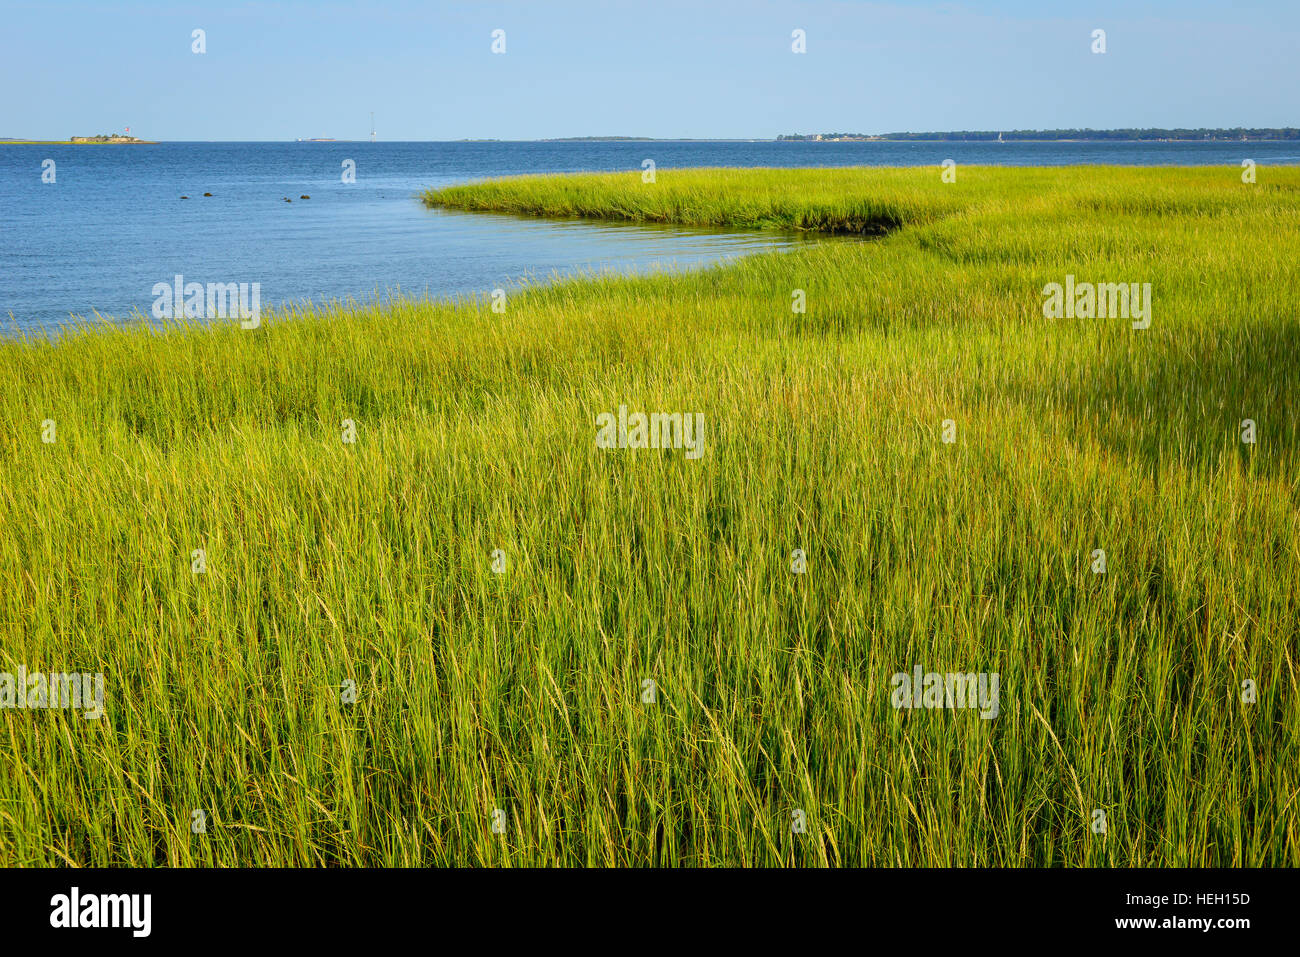 Serene landscape of Low country marshes of Spartina Alterniflora cord grass along Cooper River's edge in Charleston, SC, with Fort Sumter in distance. Stock Photo